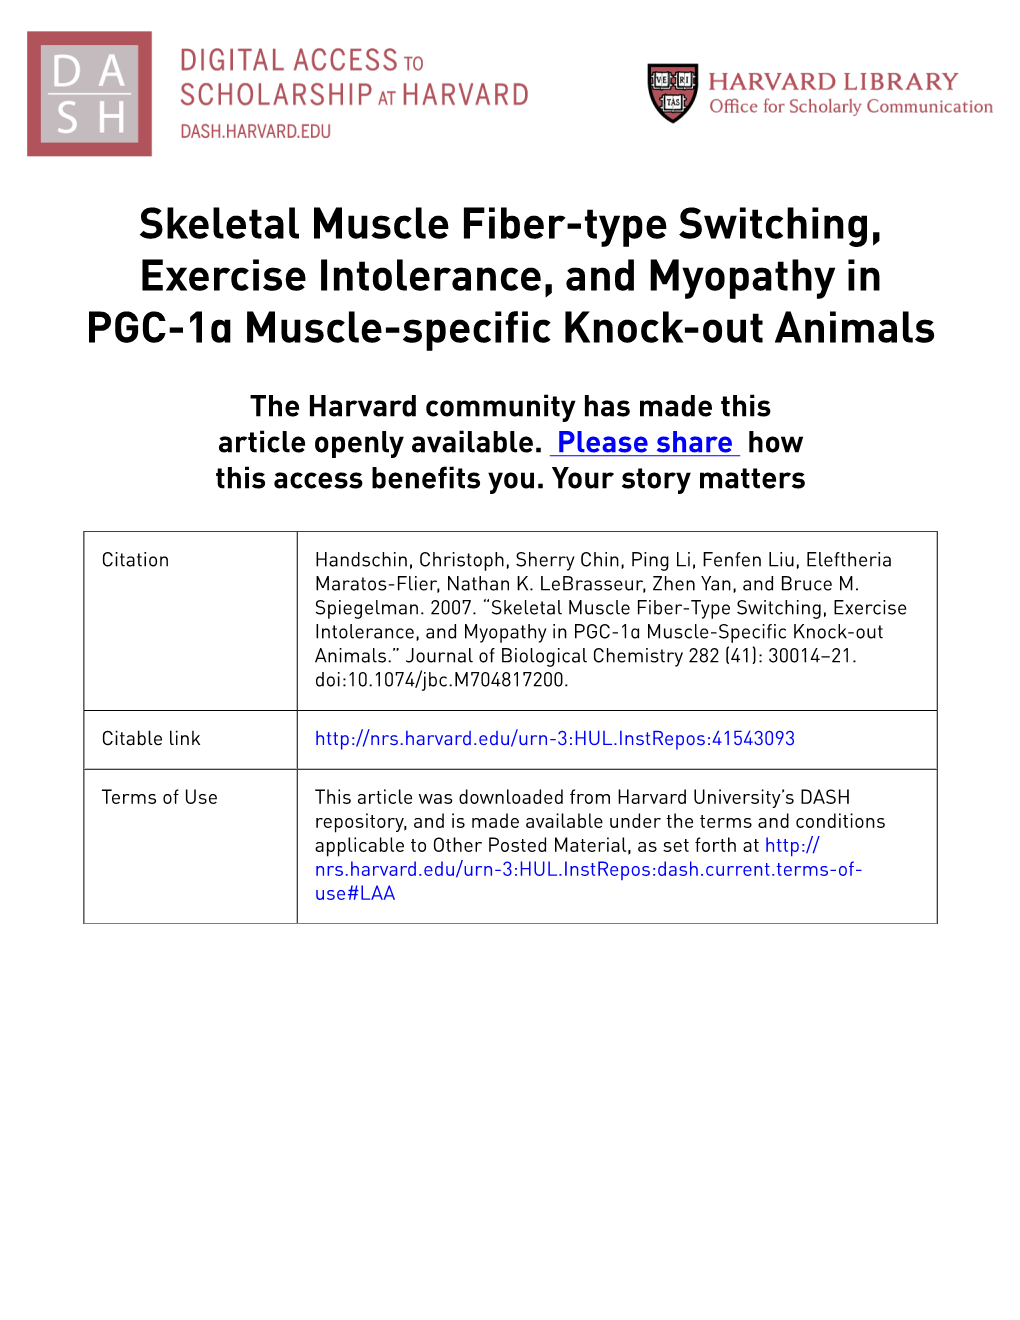 Skeletal Muscle Fiber-Type Switching, Exercise Intolerance, and Myopathy in PGC-1Α Muscle-Specific Knock-Out Animals